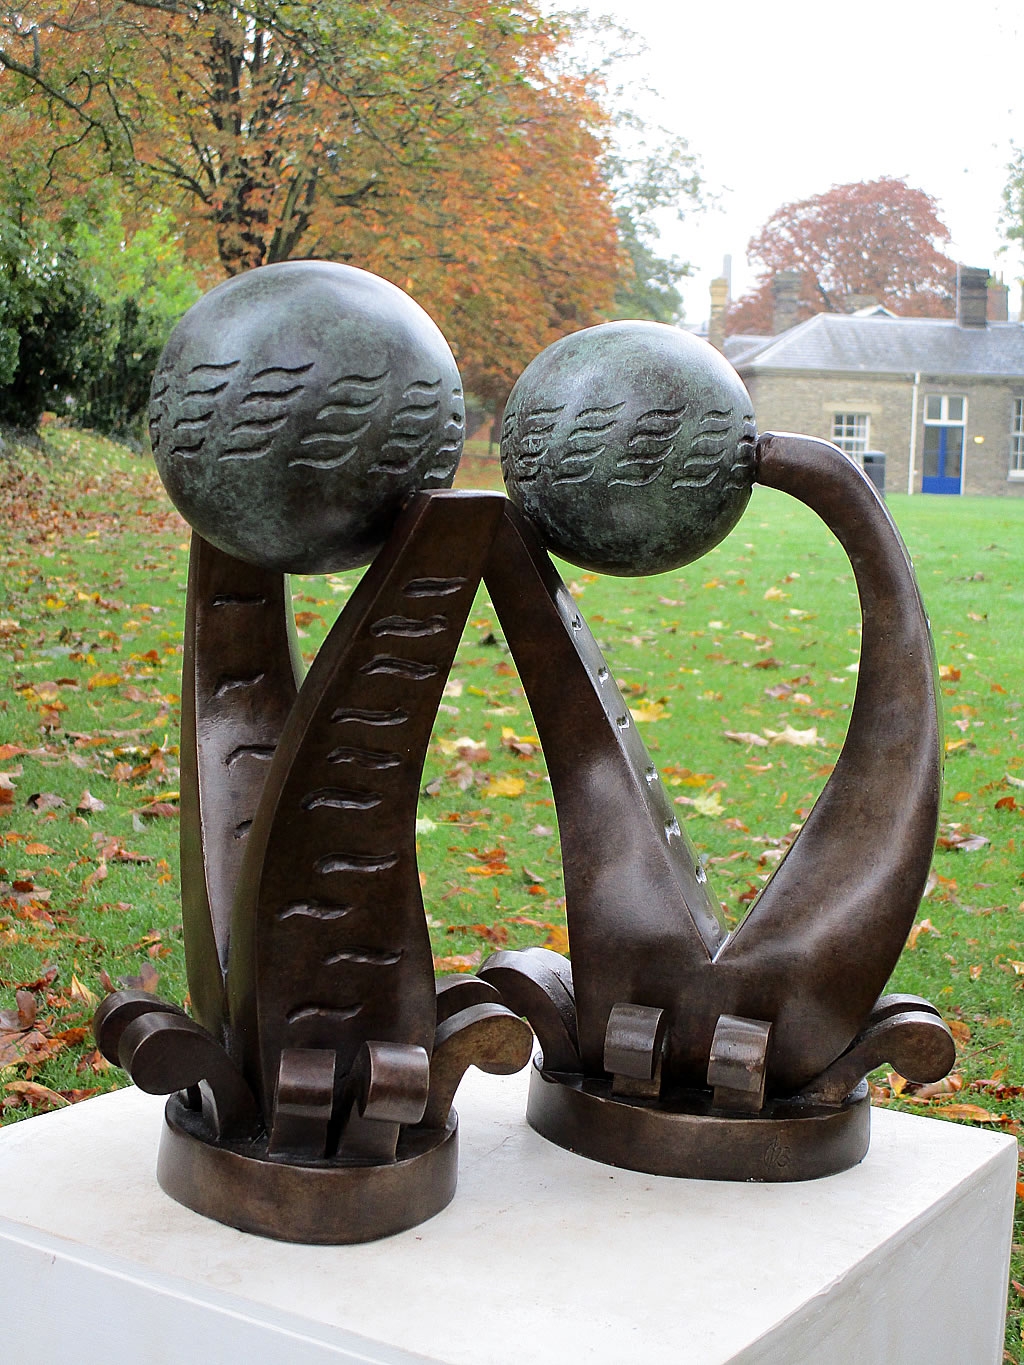 IOPC Funds Trophies (abstract sculpture) by sculptor Ian Campbell-Briggs